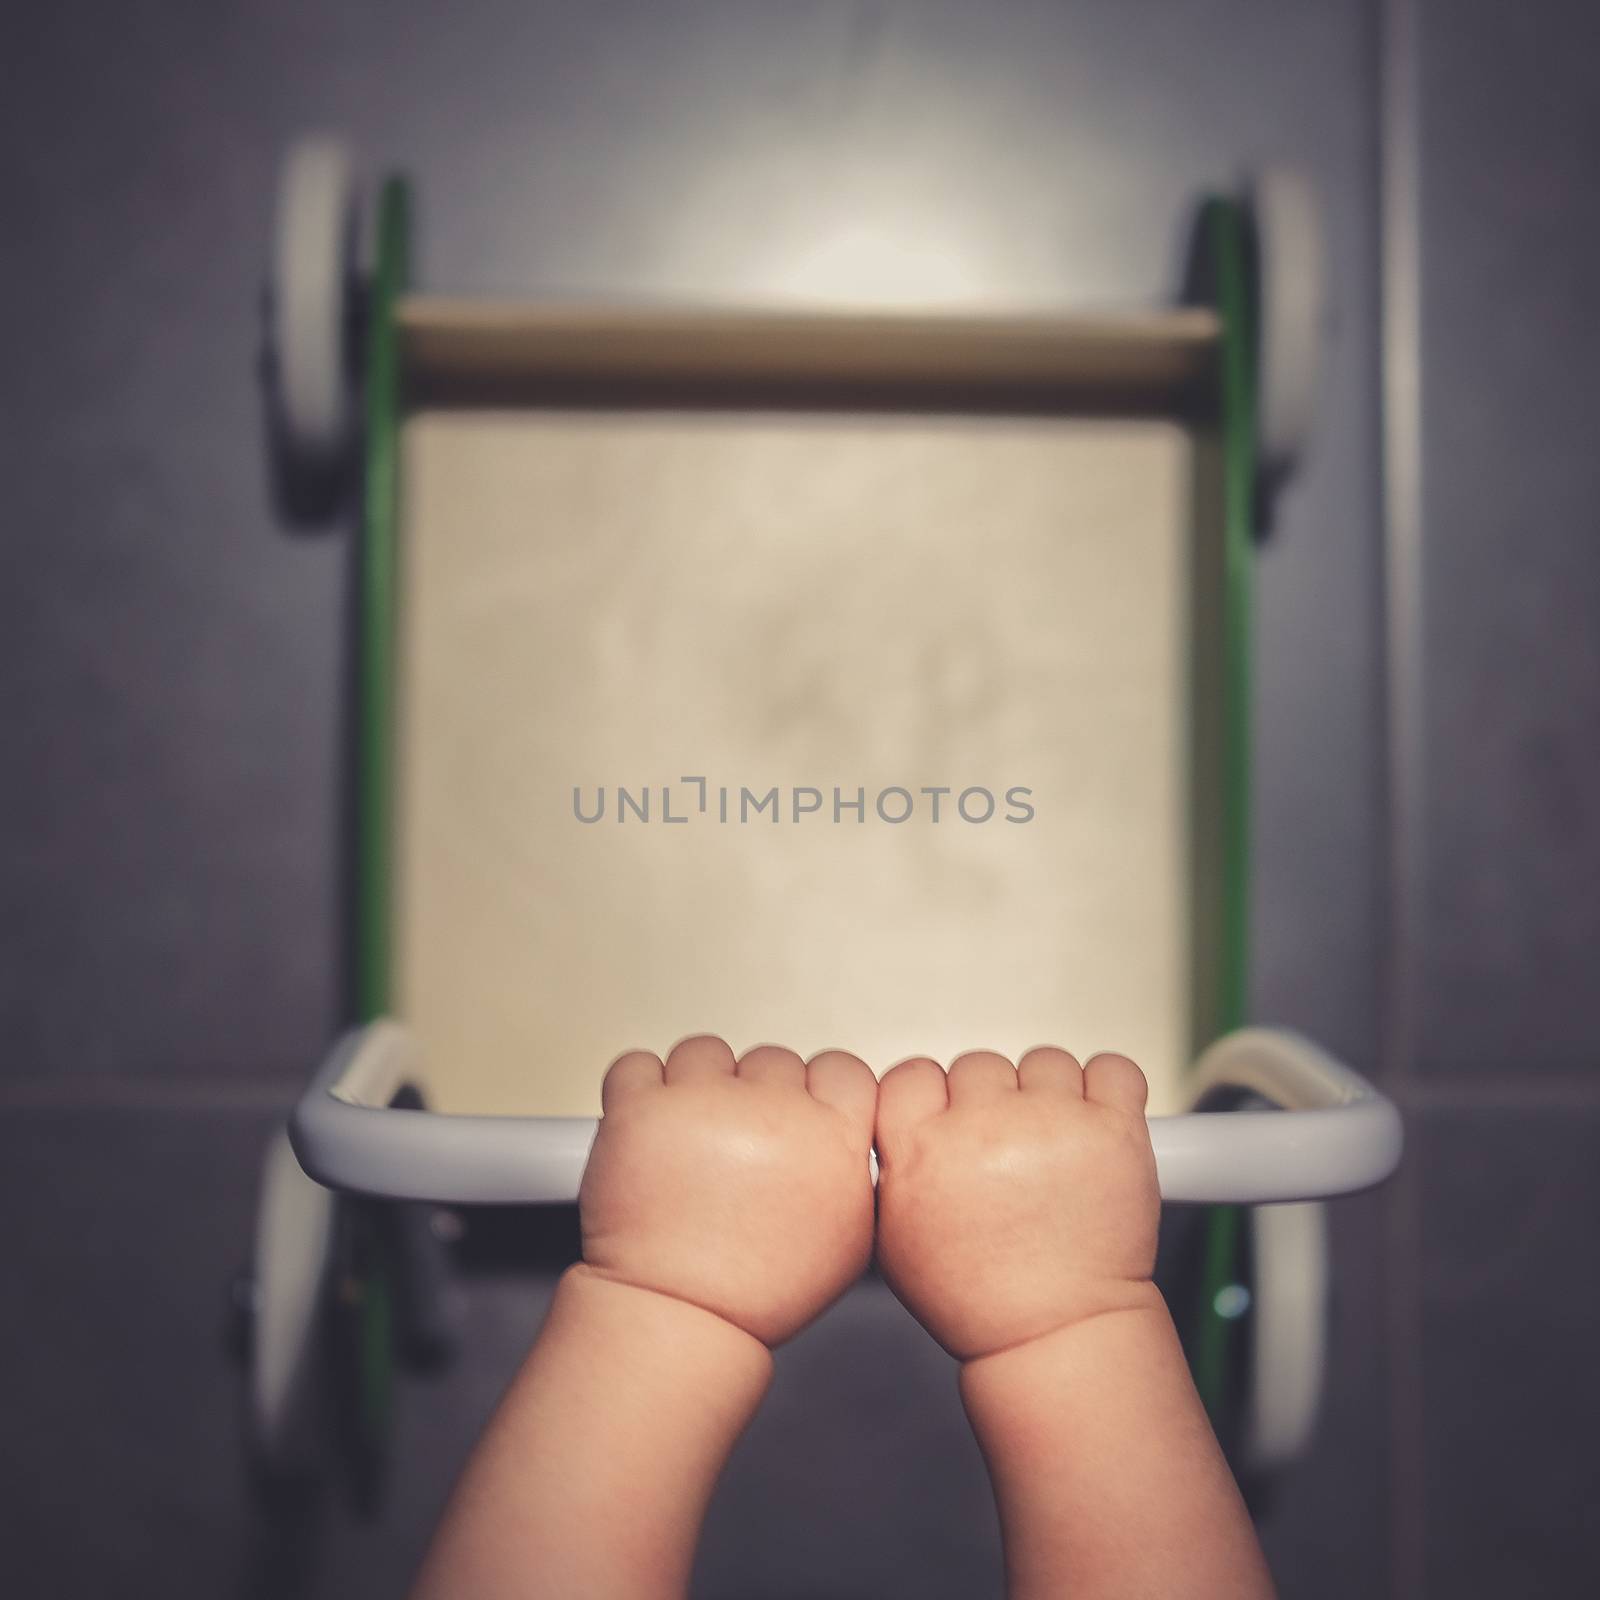 Little babys chubby hands pushing a green wooden walker on the kitchen tiles